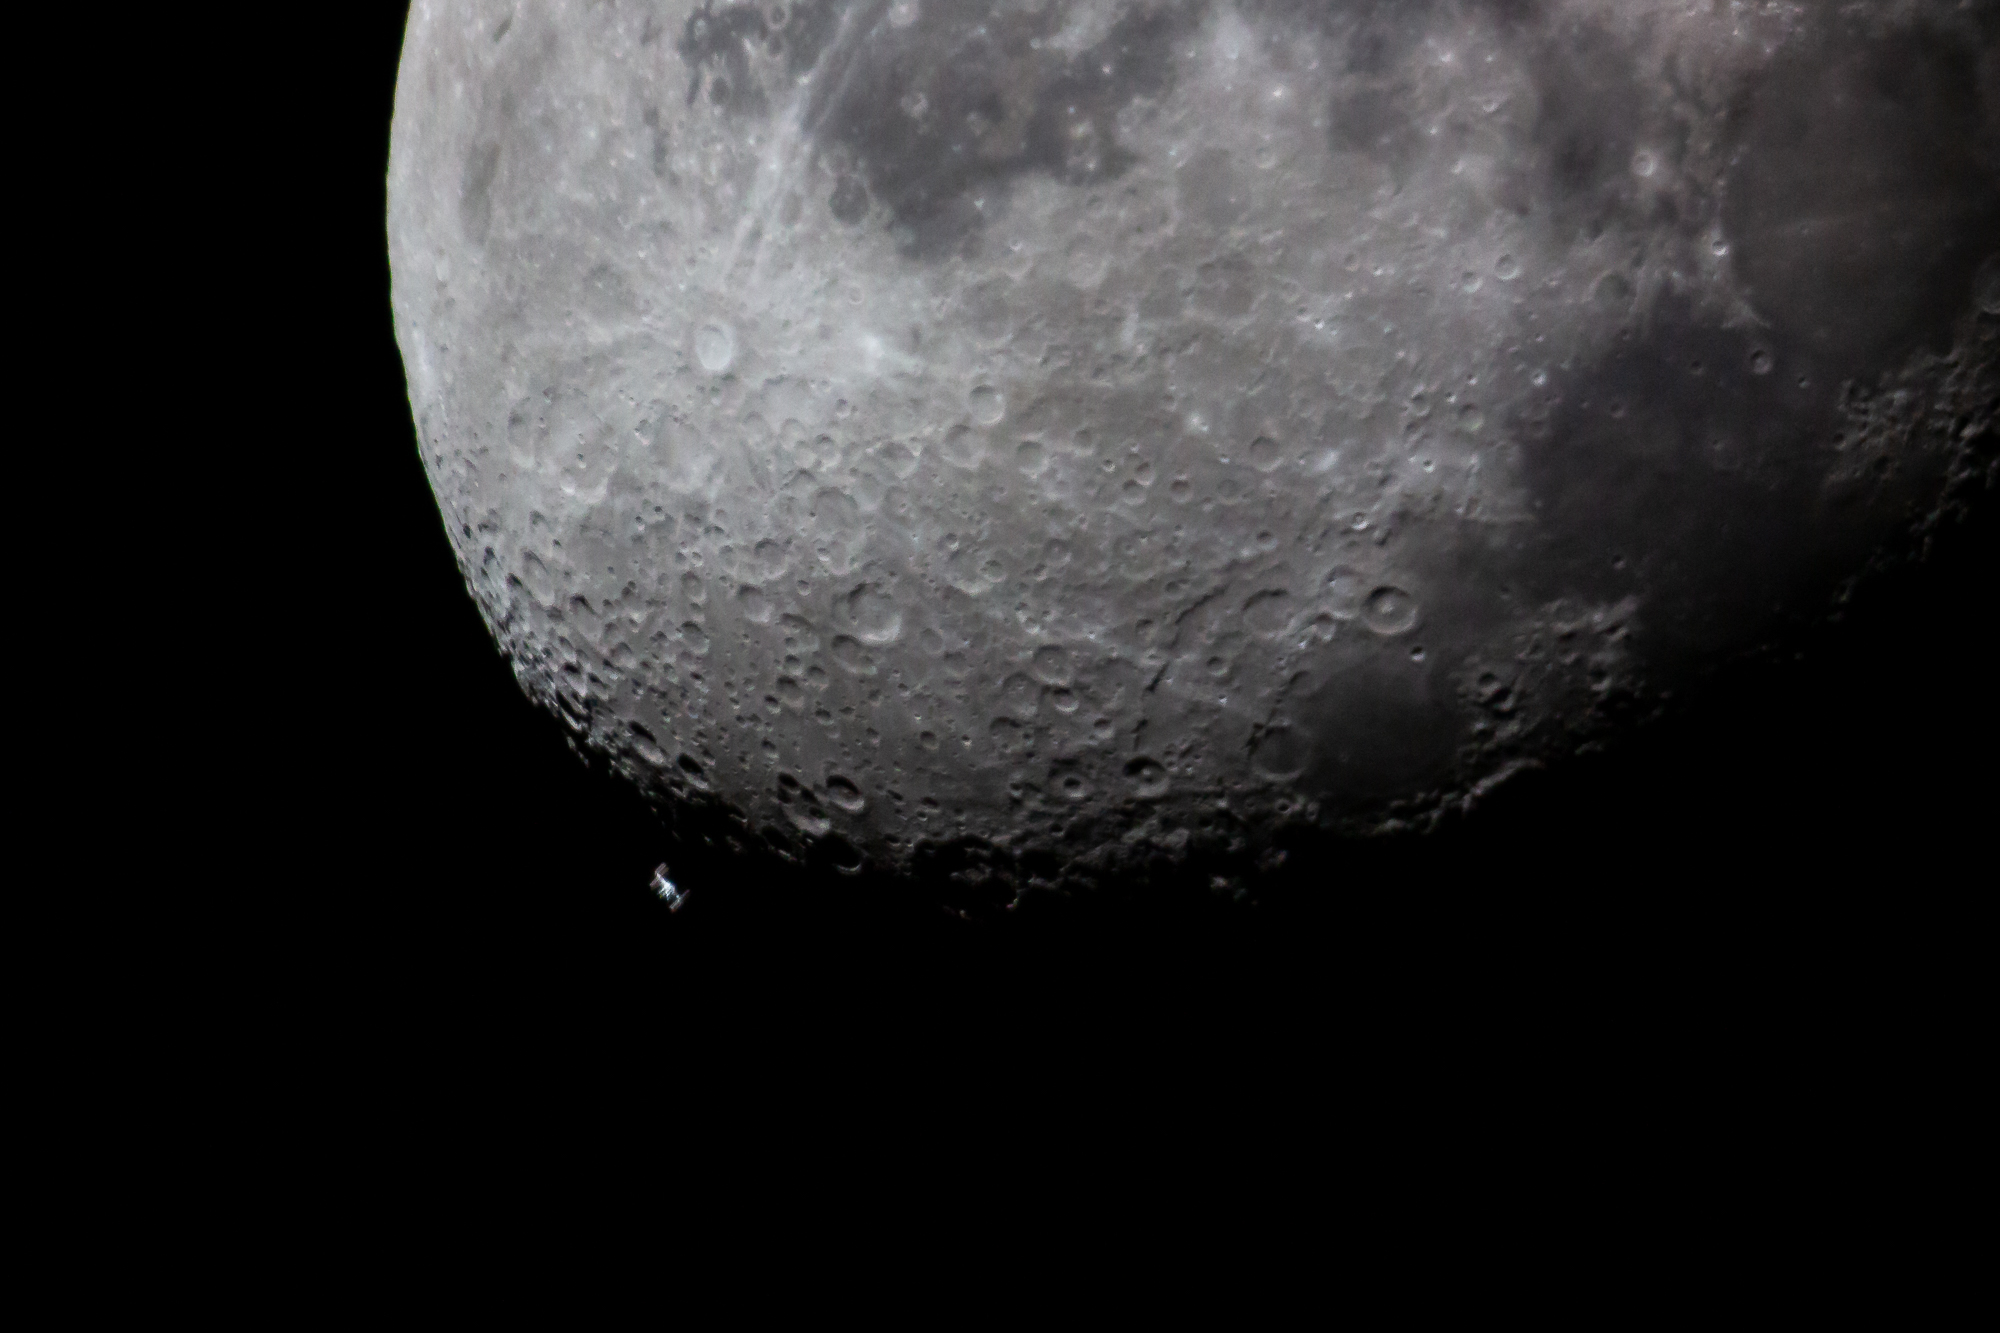 The International Space Station just before transiting the moon